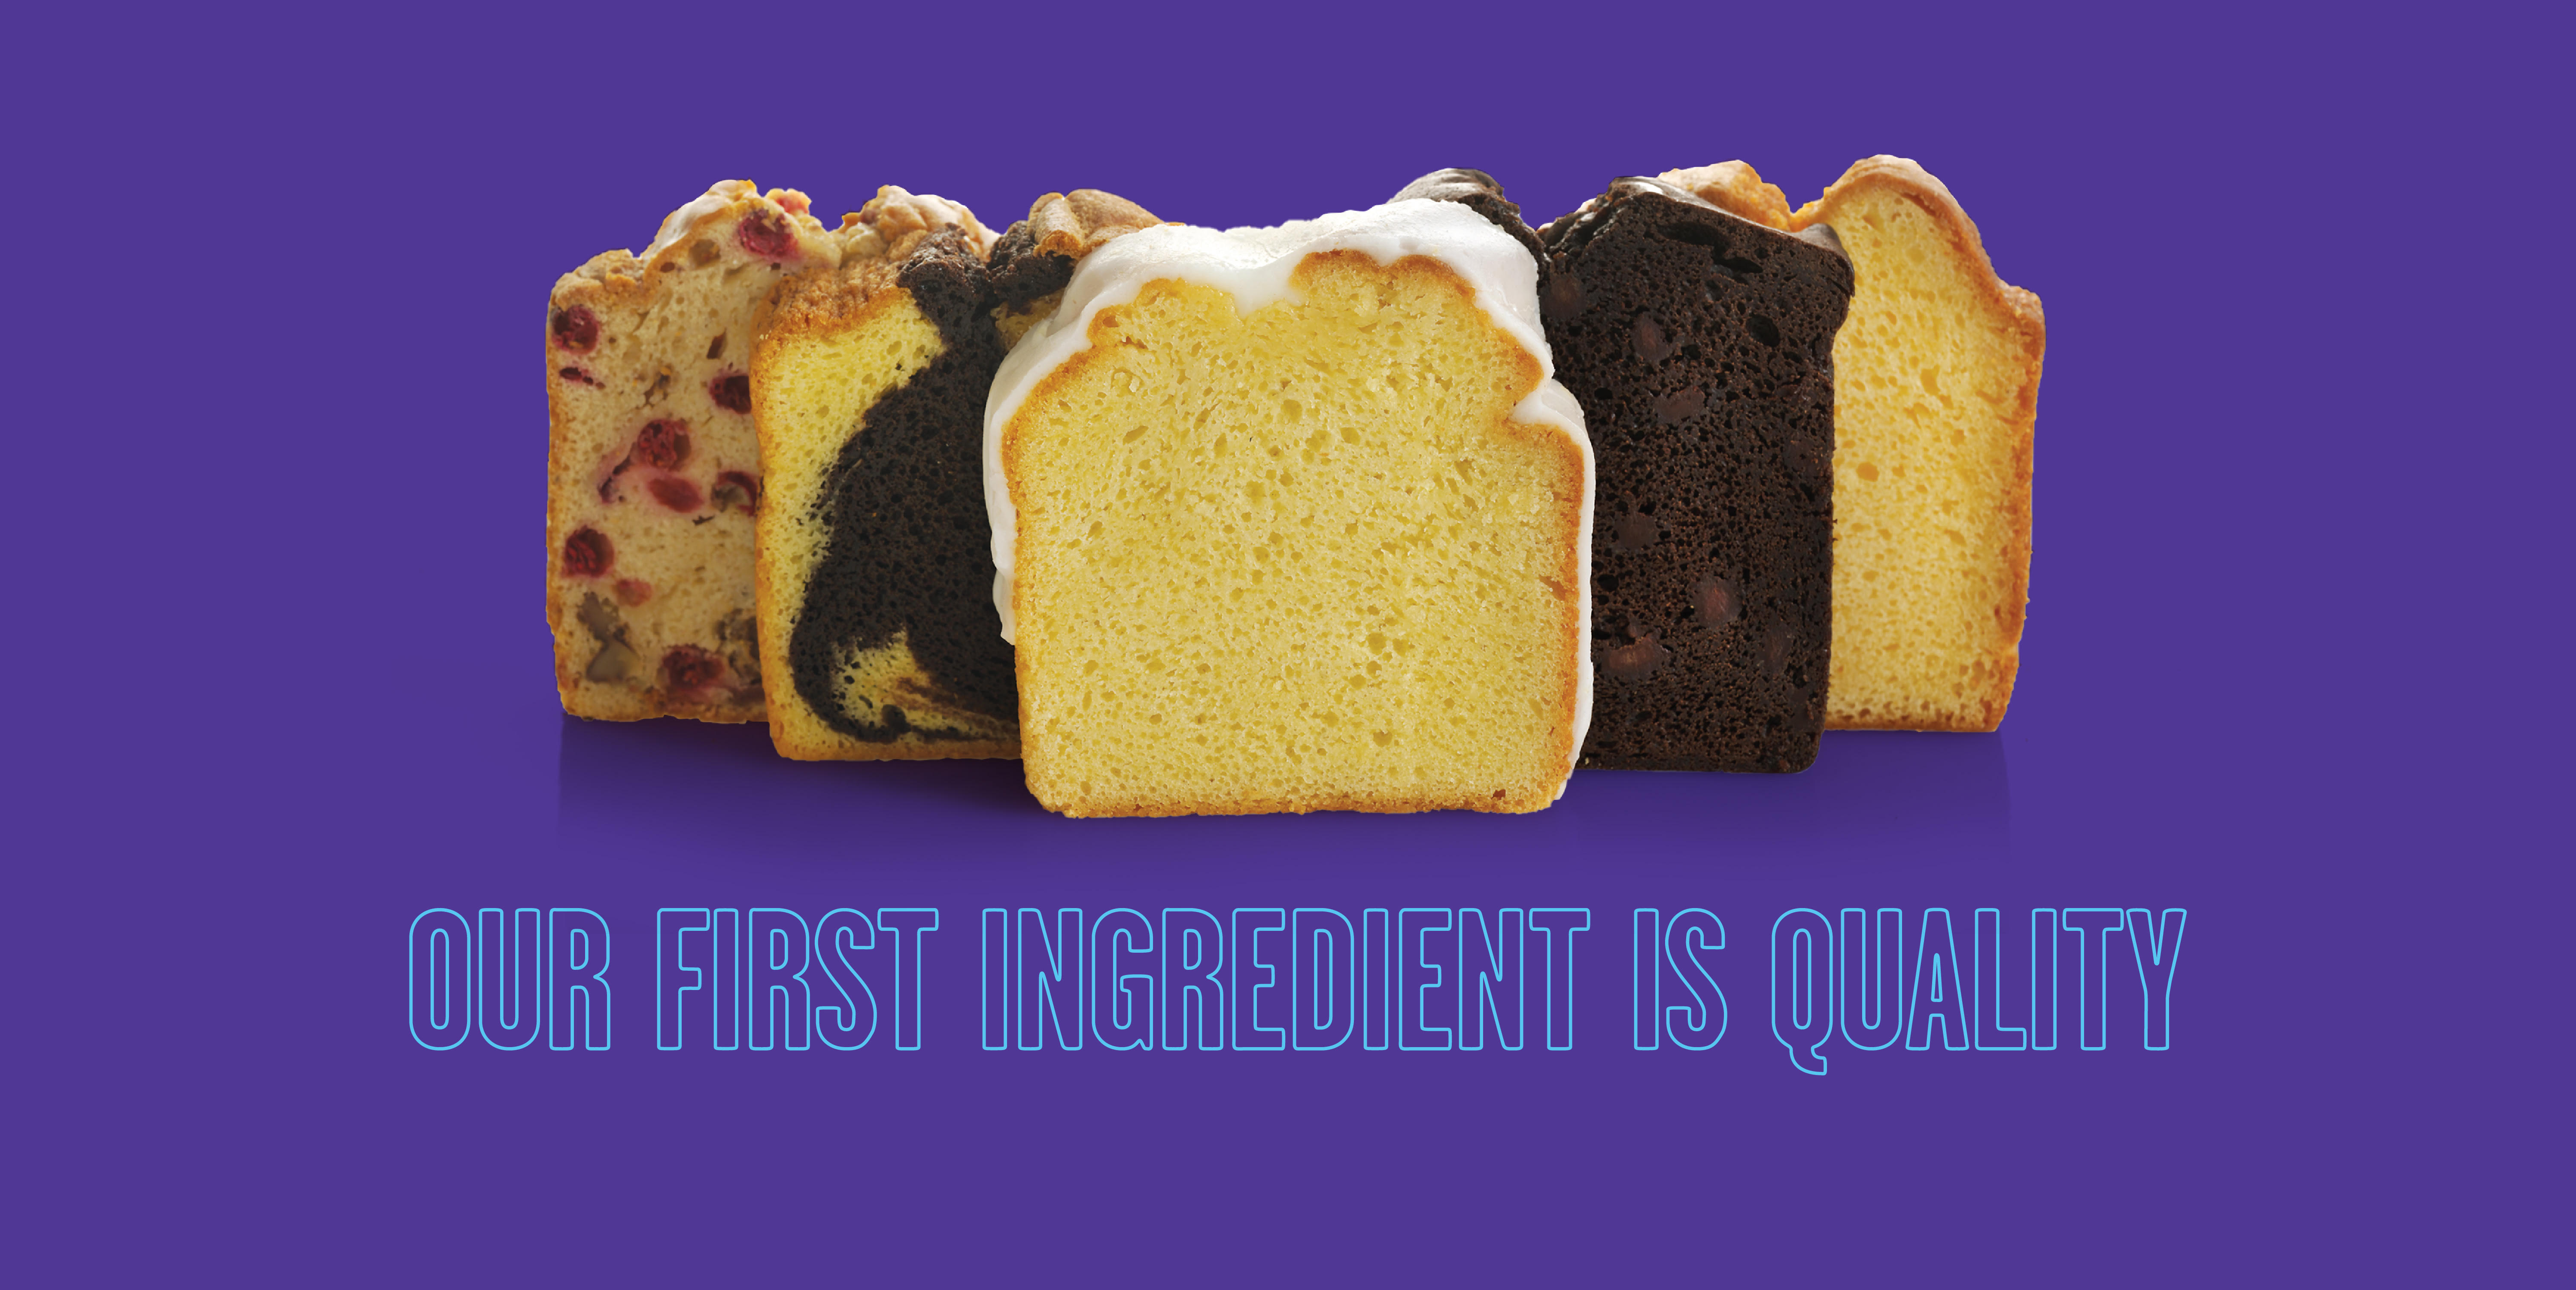 Our First Ingredient is Quality